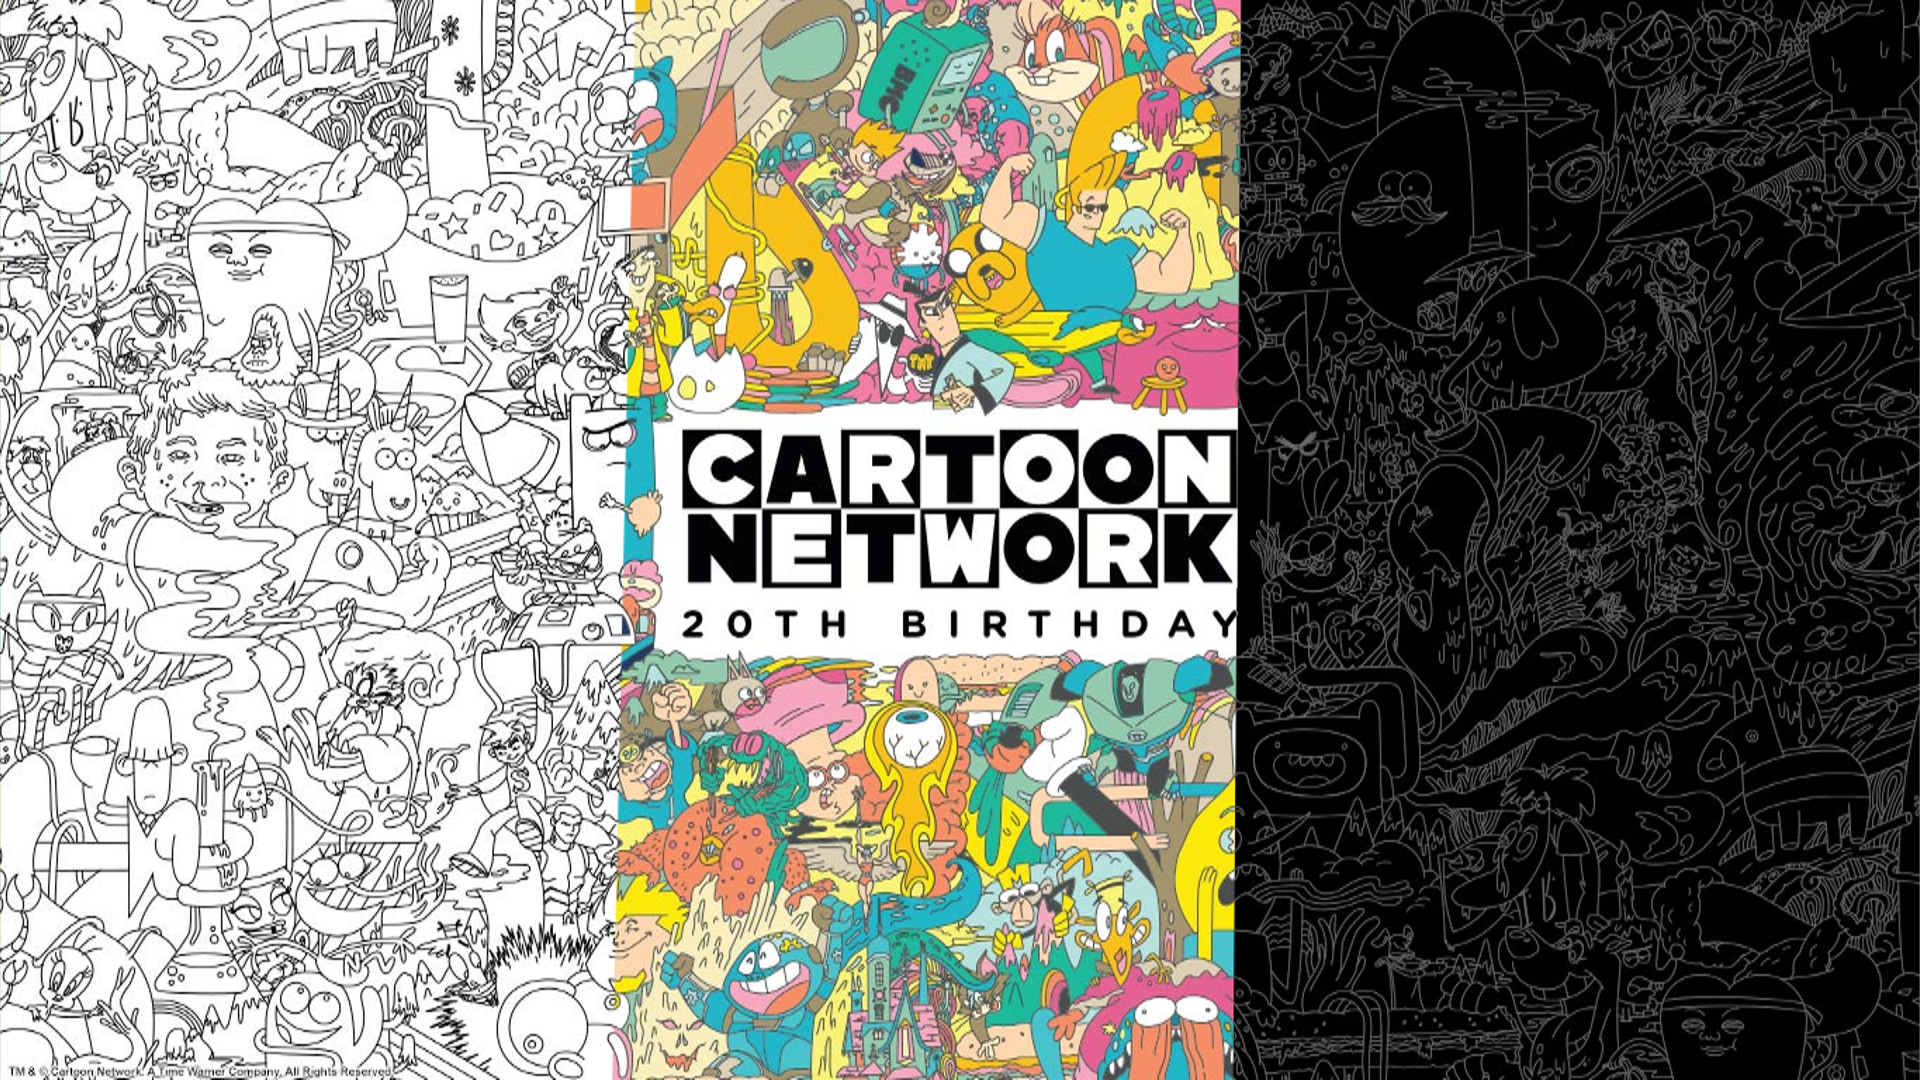 Cartoon Network 20th Anniversary Wallpapers by OldCartoonNavy47